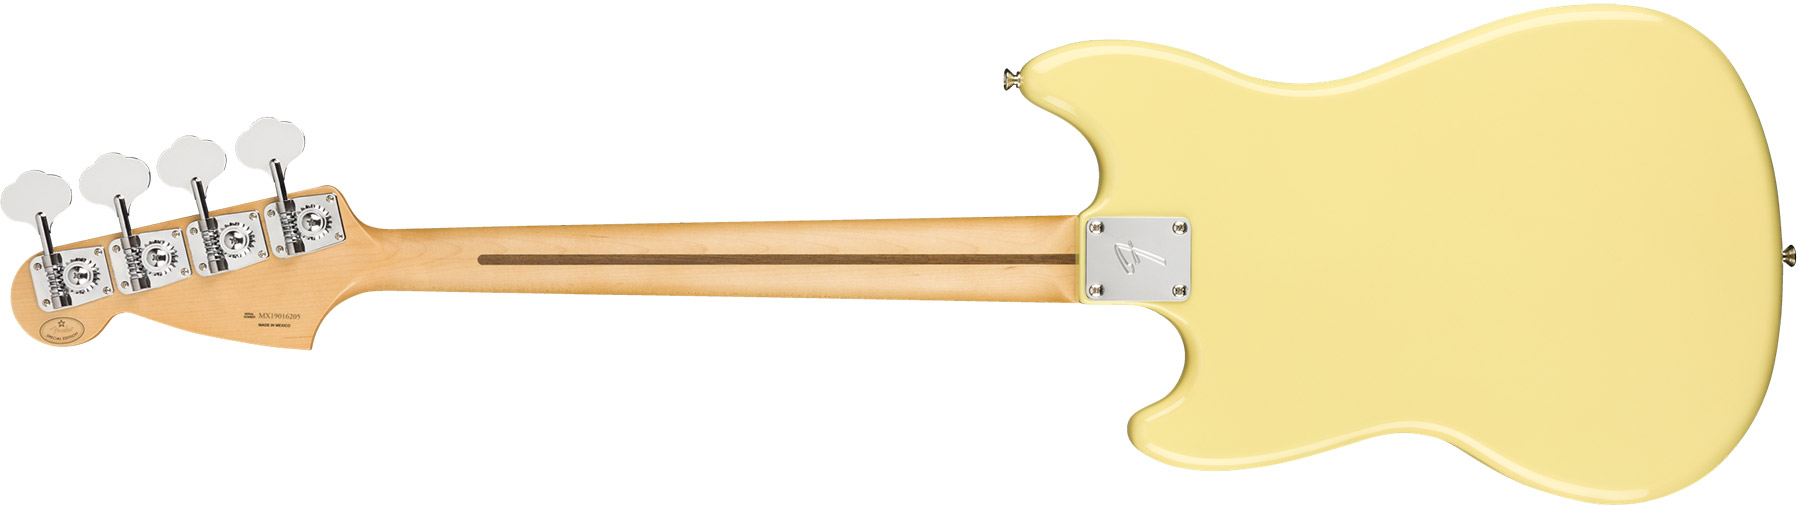 Fender Player Mustang Bass Pj Ltd Mex Mn - Canary - Solid body electric bass - Variation 1